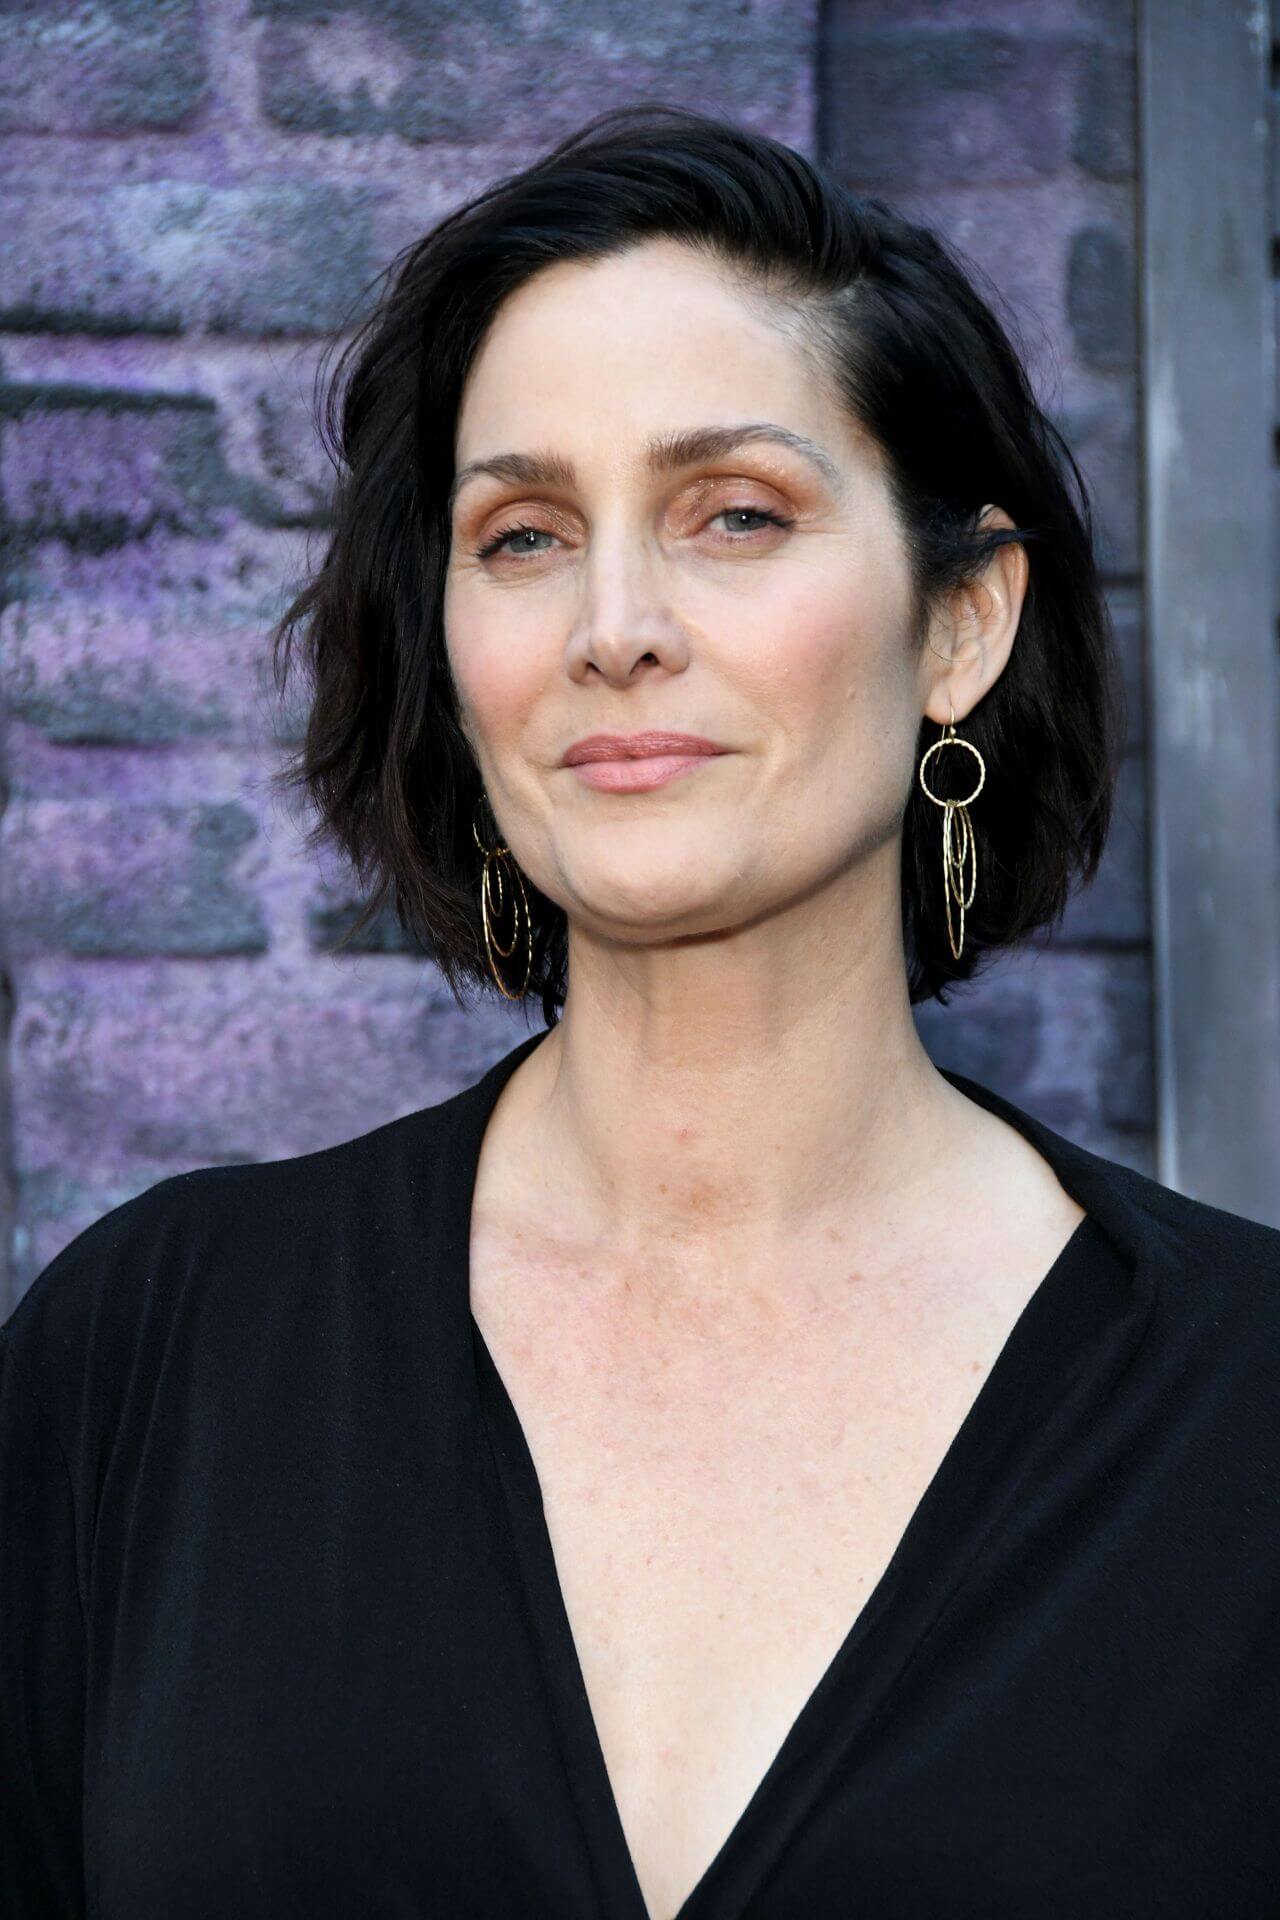 70+ Hot Pictures Of Carrie Anne Moss Will Drive You Nuts For Her 6